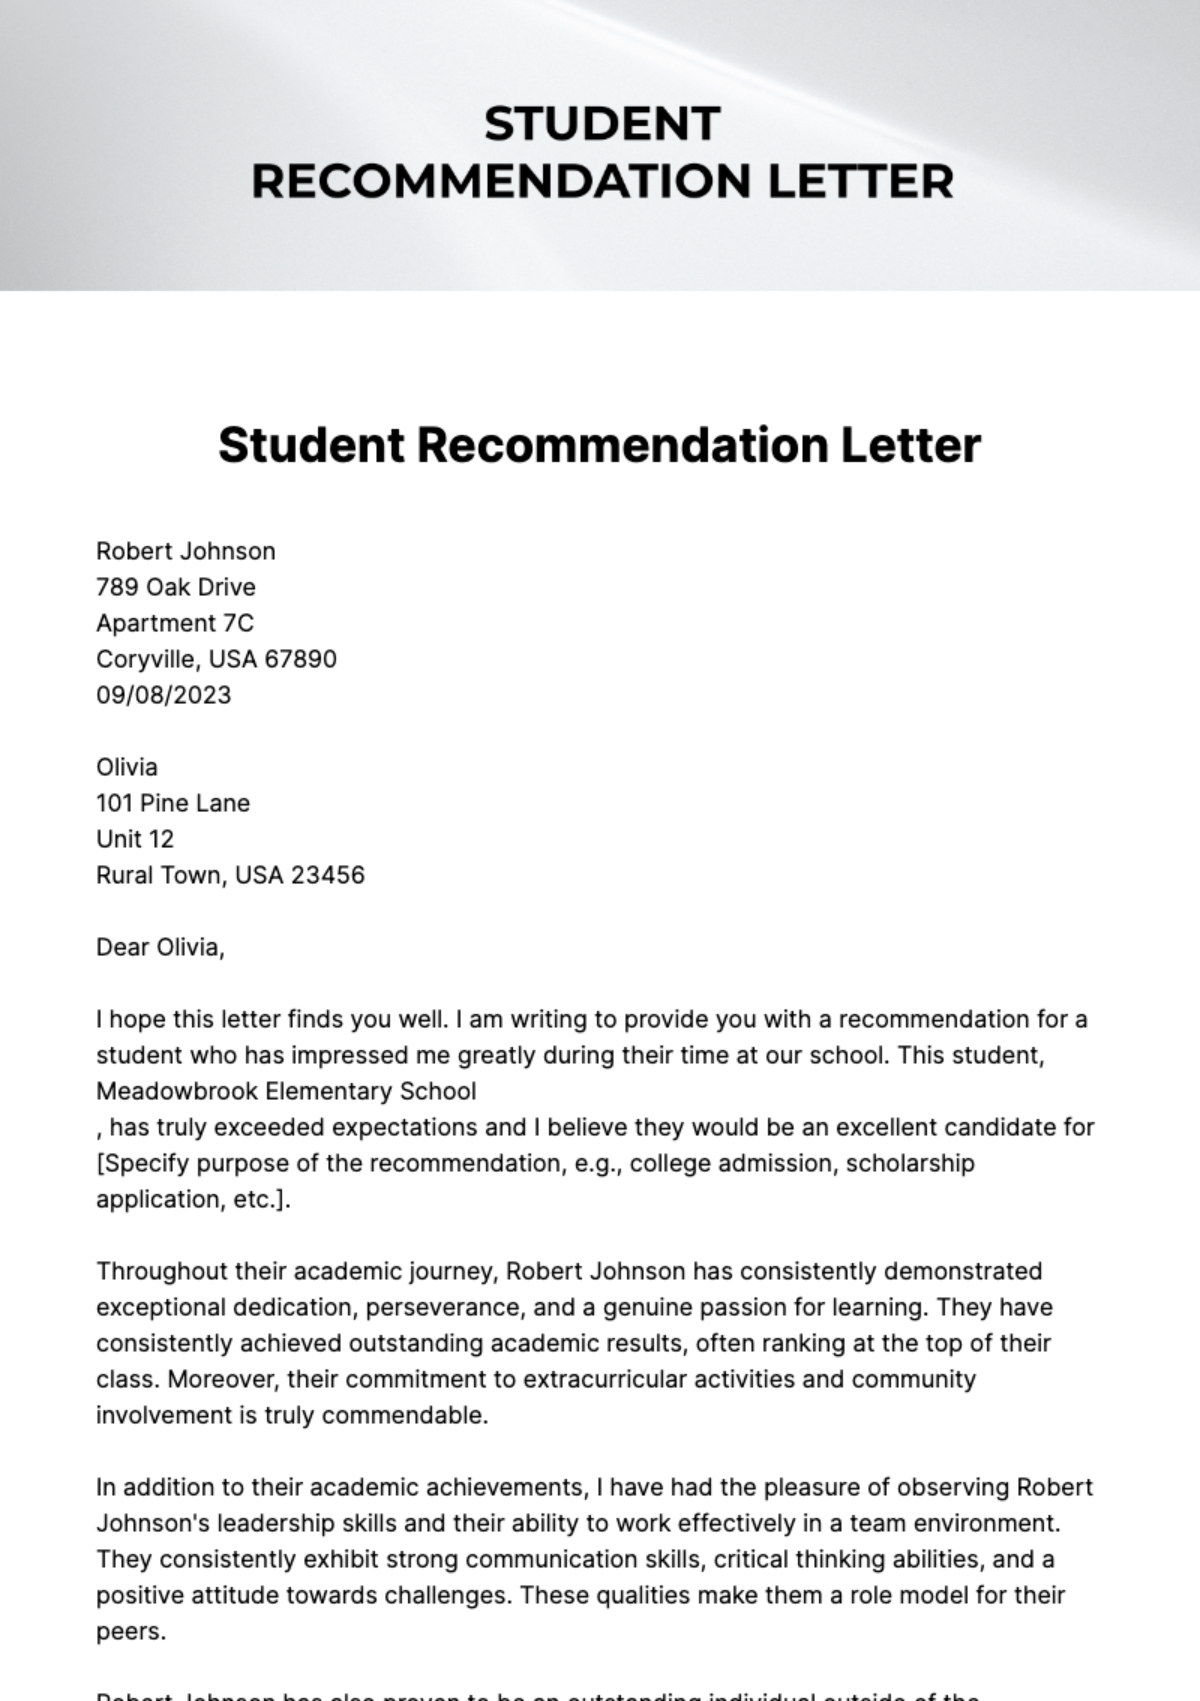 Free Student Recommendation Letter Template